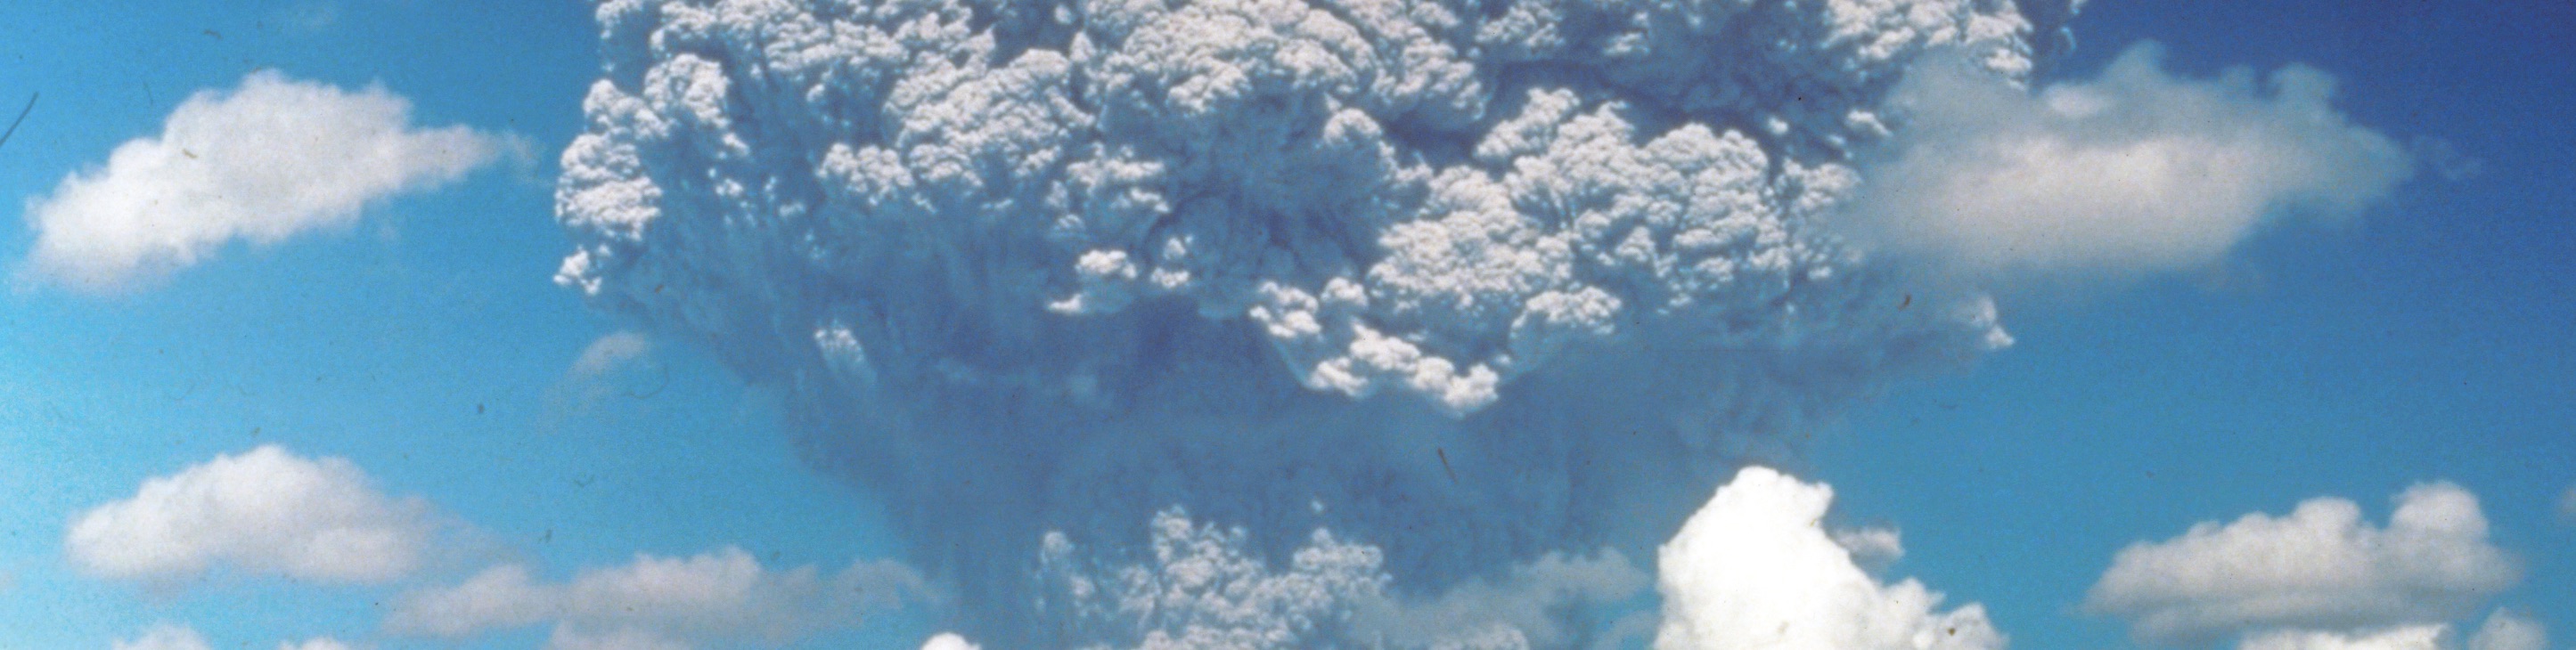 Plume of Mt. Pinatubo 1991 eruption (Dave Harlow, USGS)